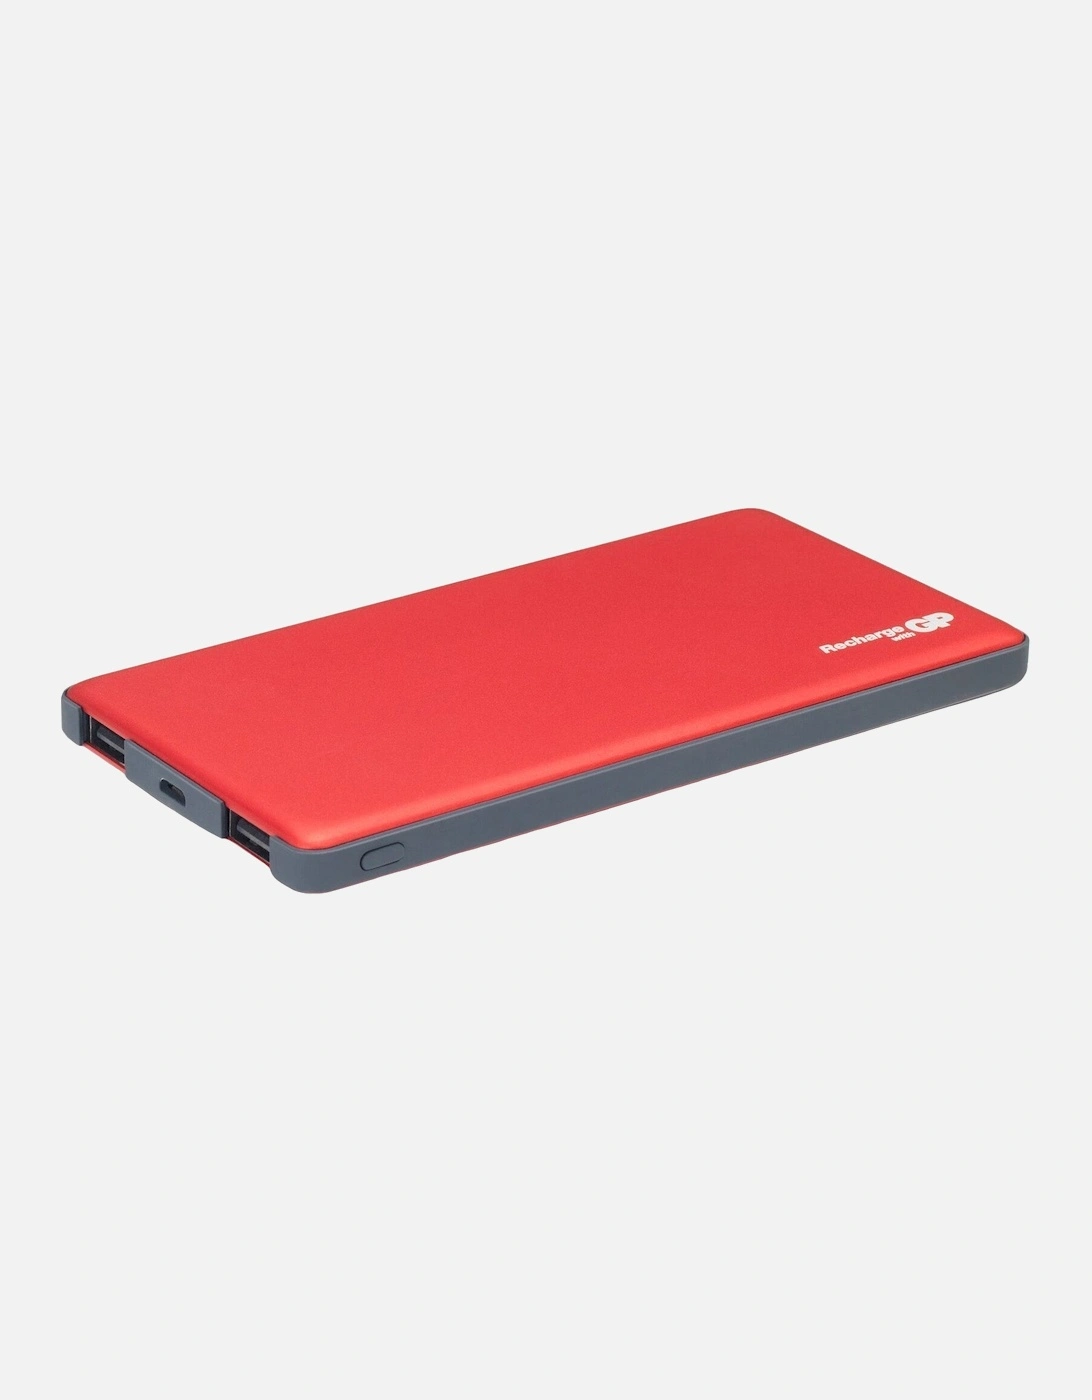 GP Heated Jacket 5000 mAh Rechargeable Battery Power Pack - Red, 3 of 2